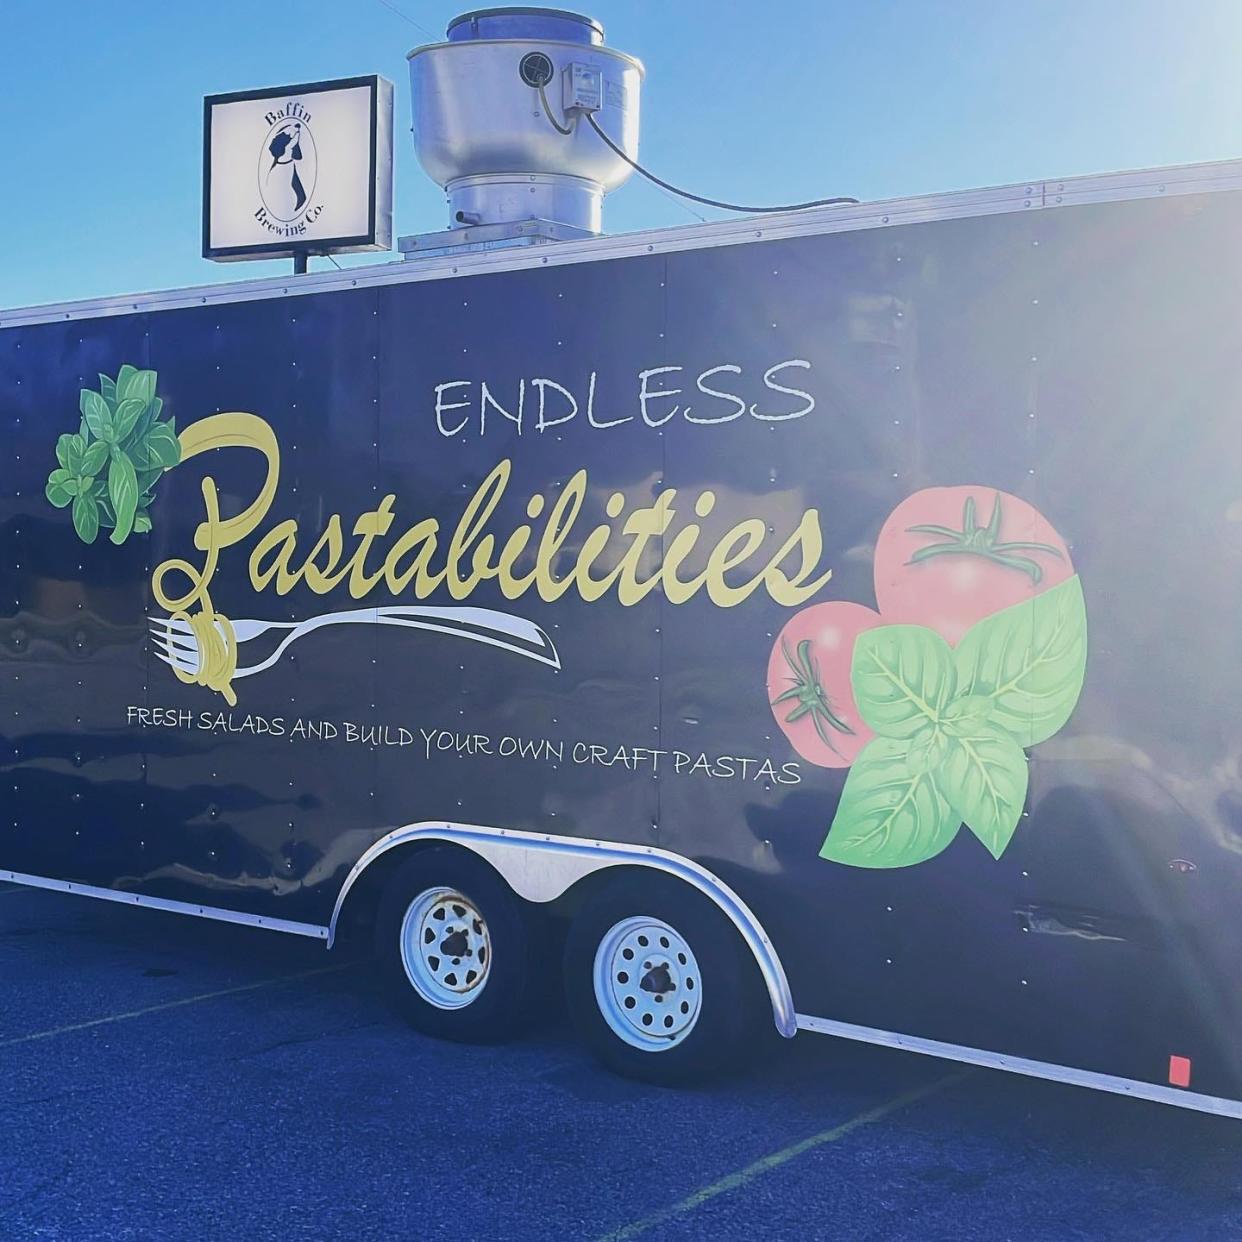 Brothers Alex and Anthony Christie are planning to open their food truck, Endless Pastabilities LLC, in Marine City Monday.